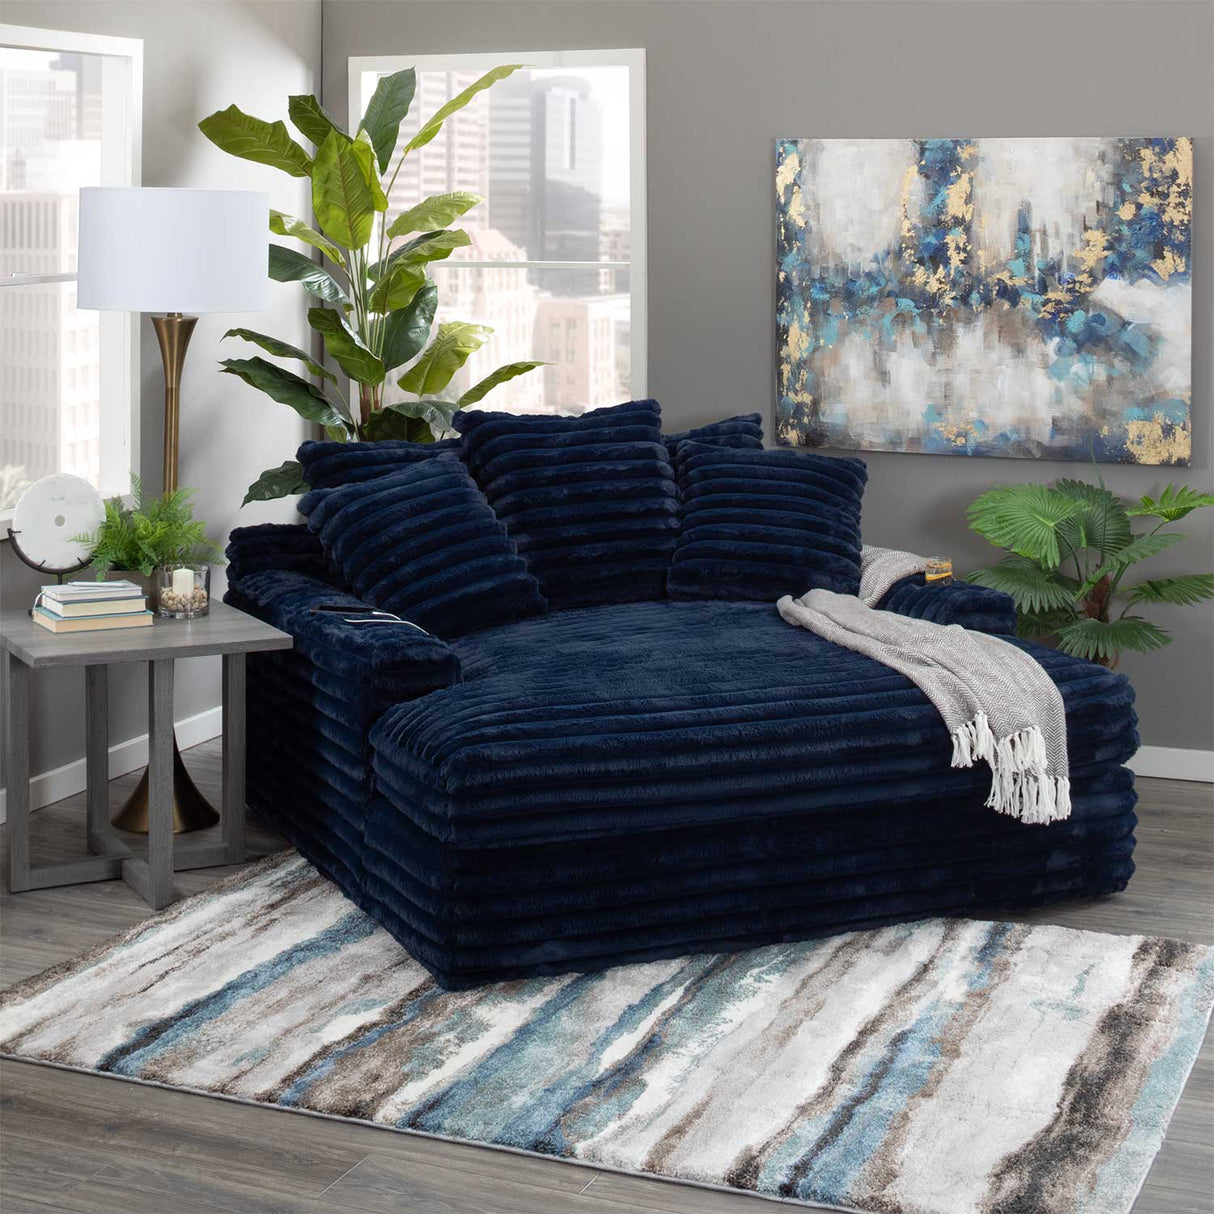 Onyx NAVY Chaise Lounge